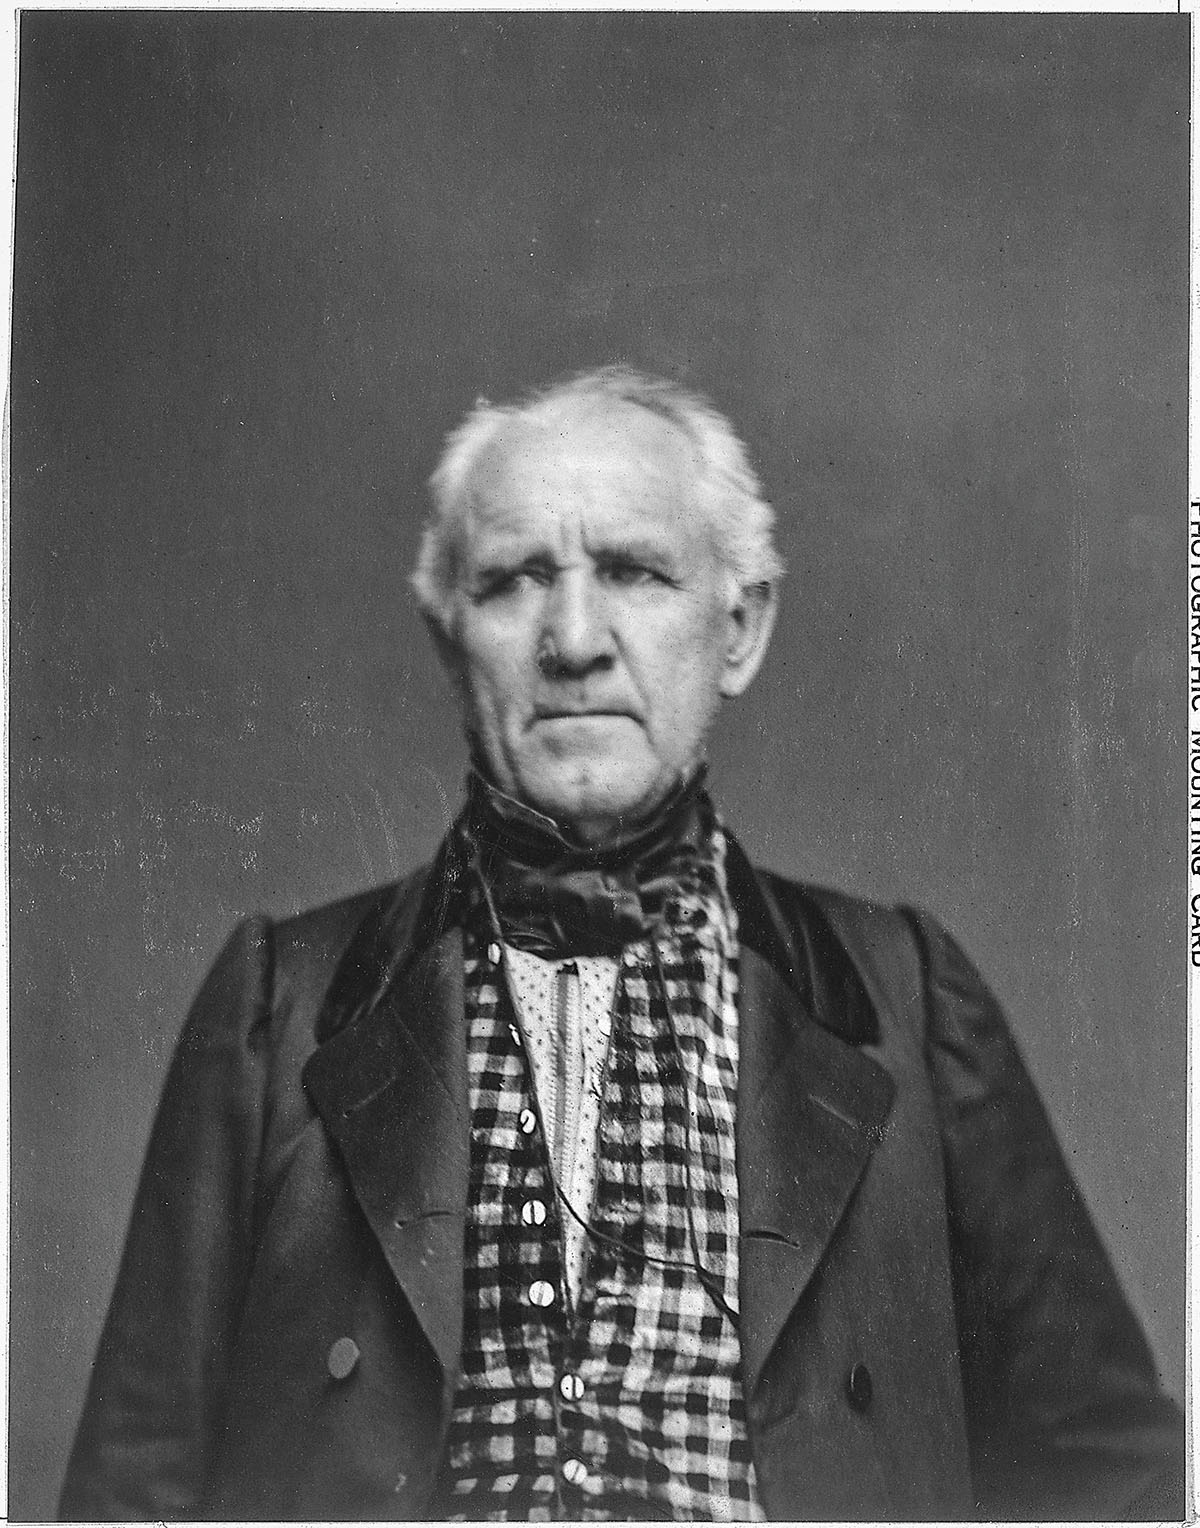 A black and white portrait of Sam Houston in a jacket and checkered shirt